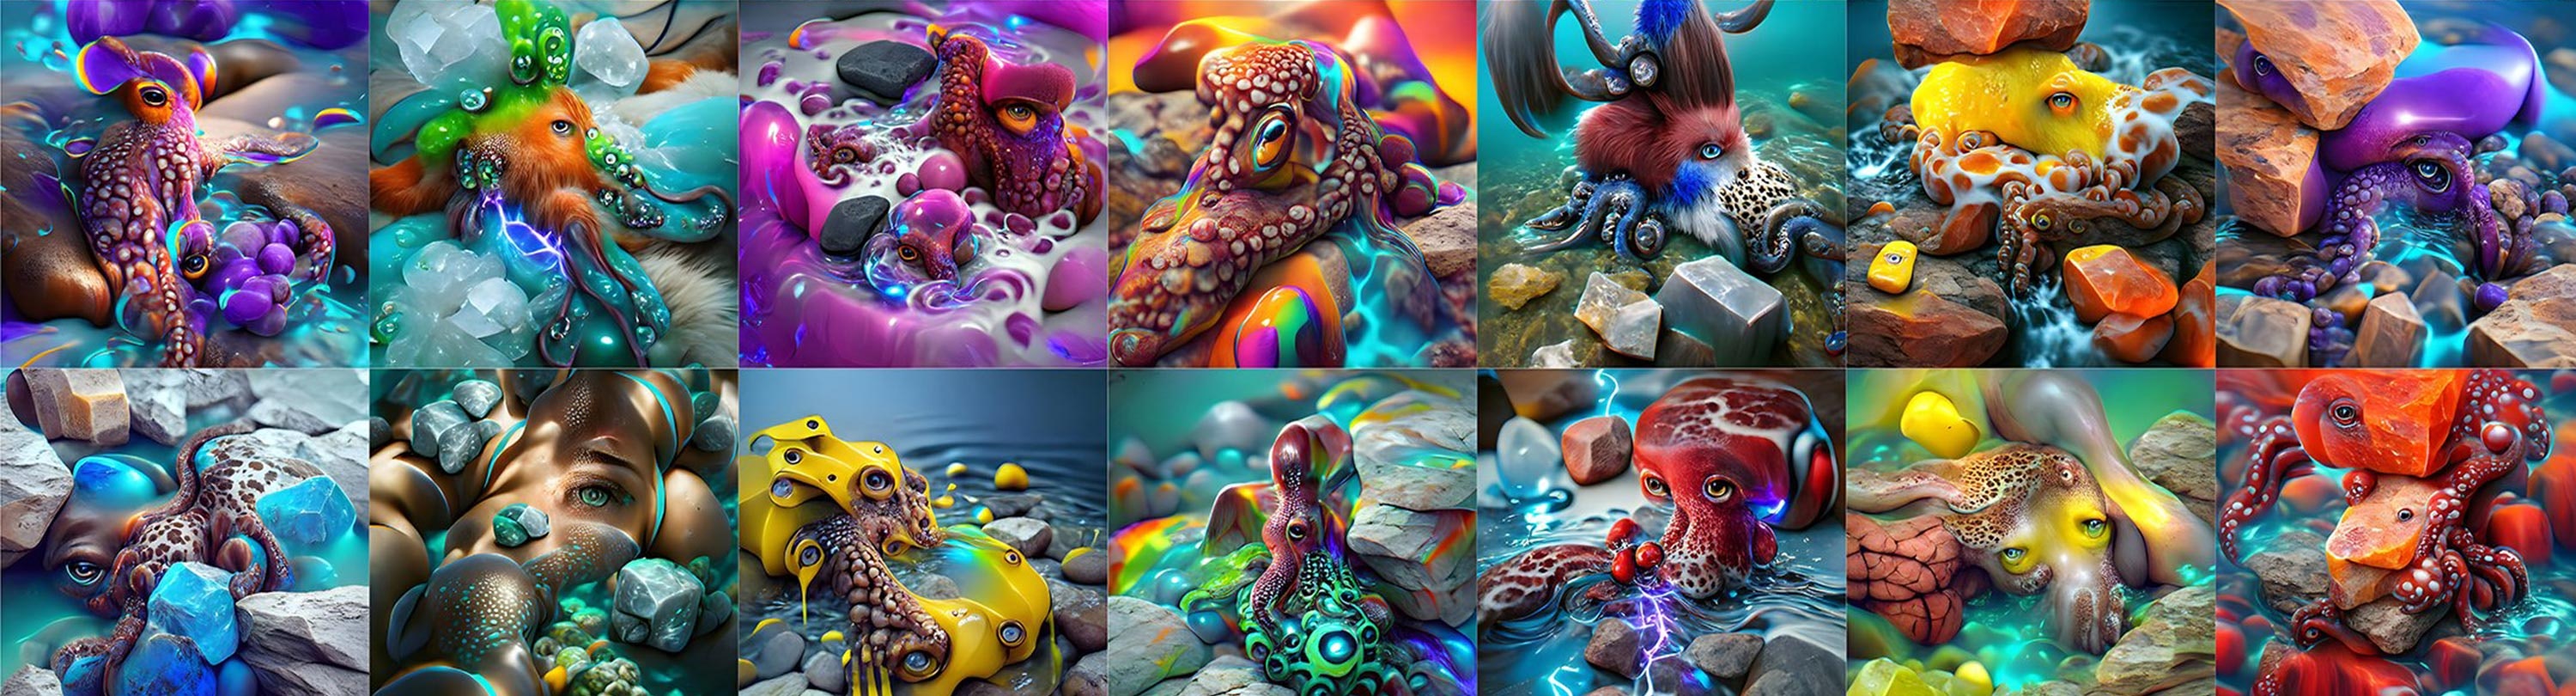 A collage of colourful AI generated images of different octopus